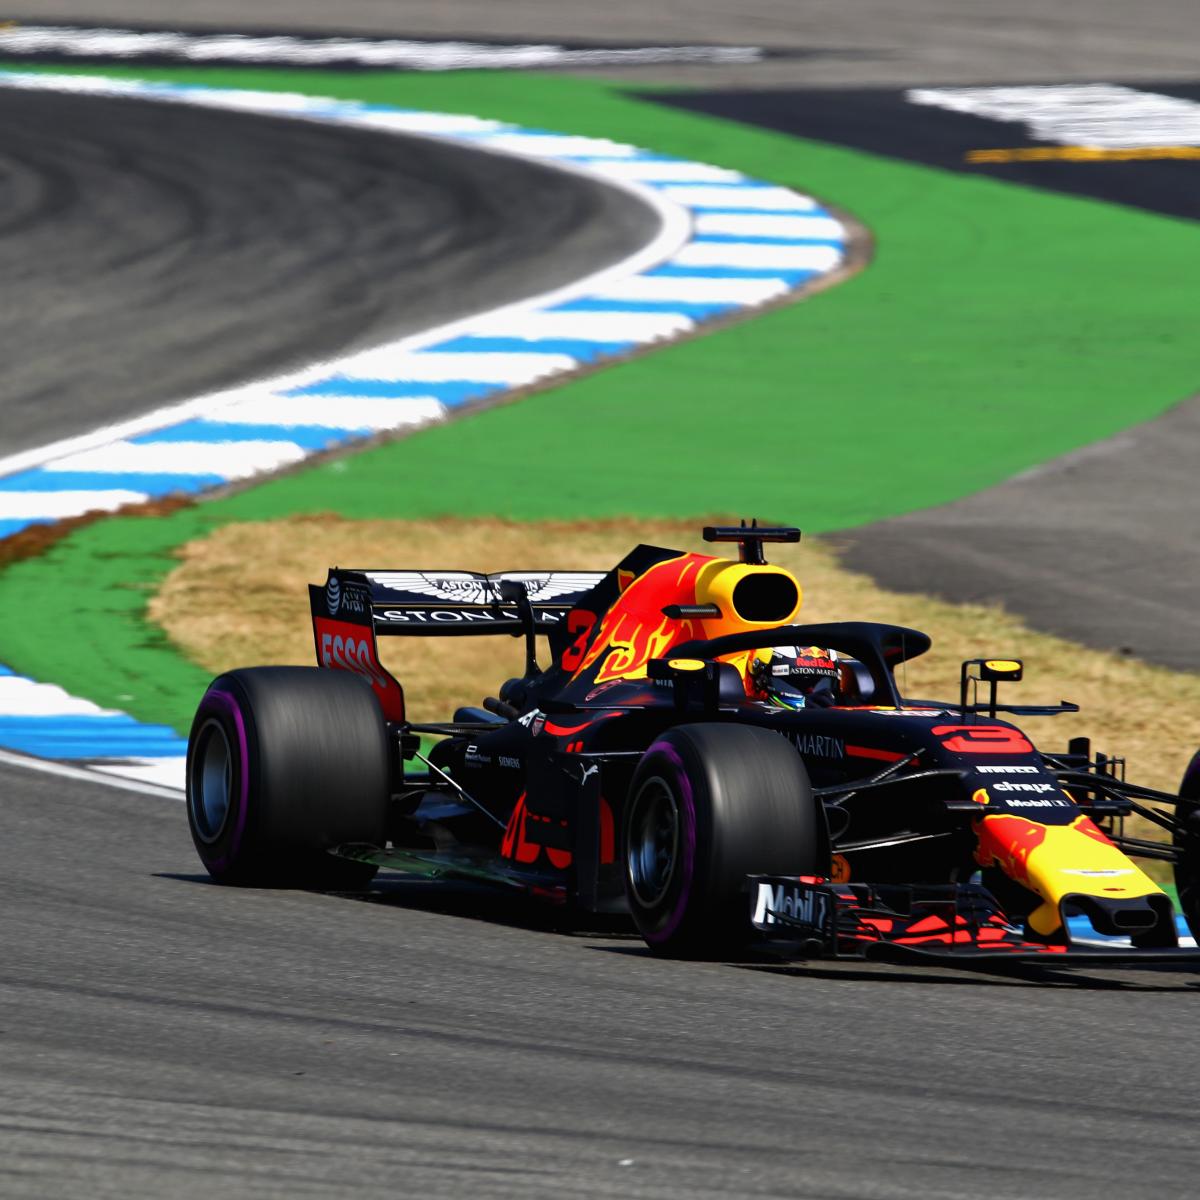 German F1 Grand Prix 2018 Qualifying: Results, Times from Friday's